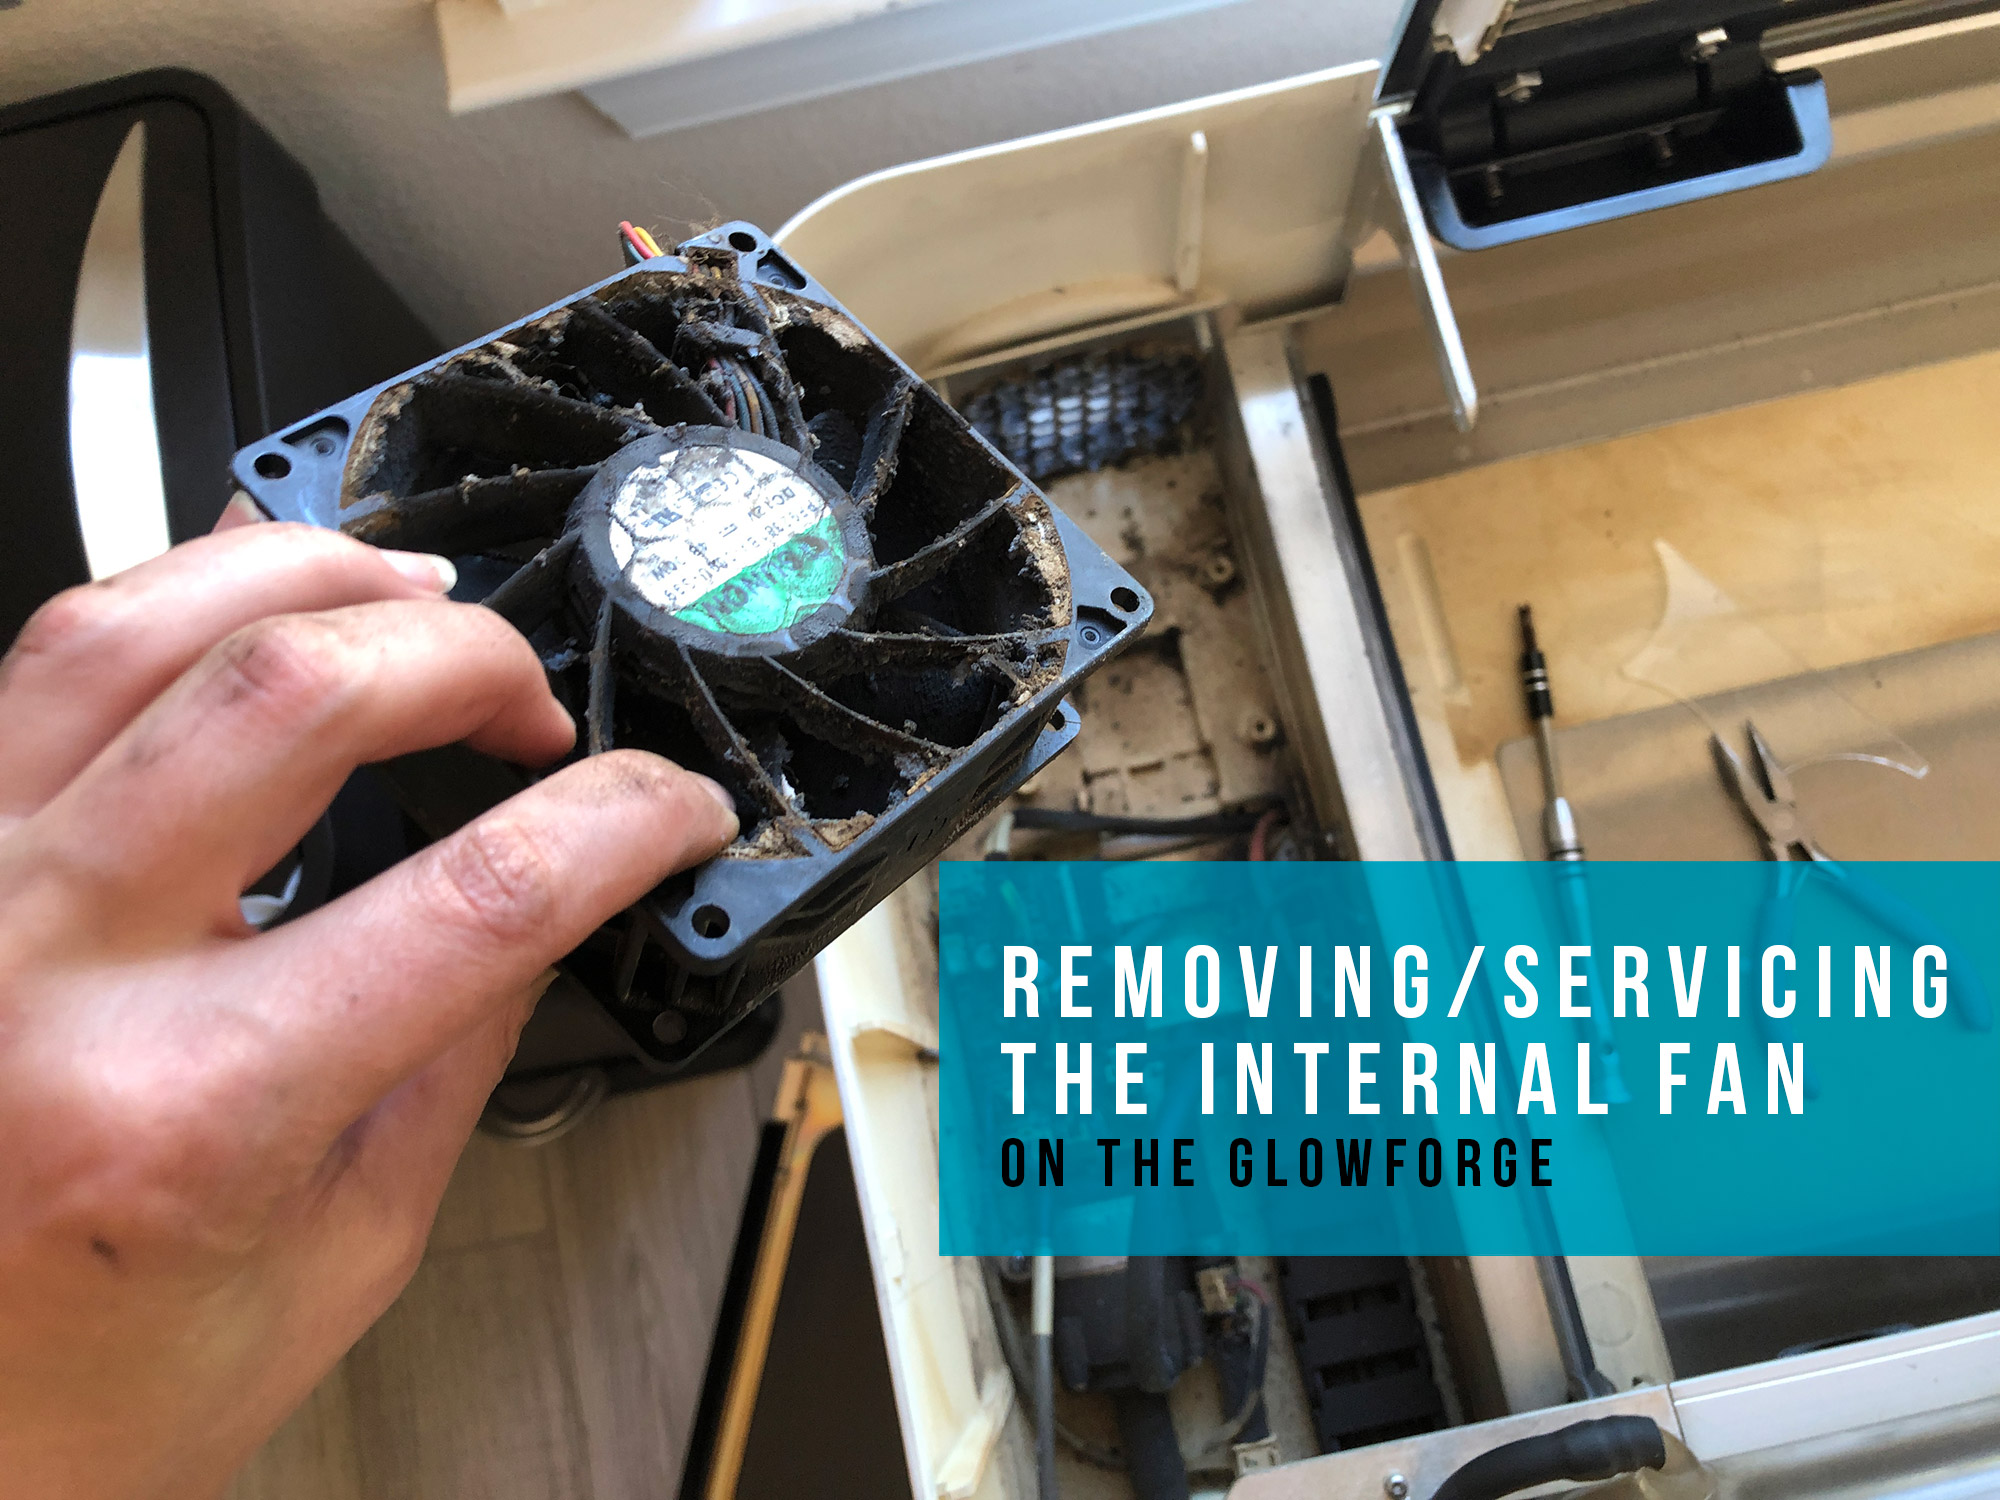 Removing or Servicing the Glowforge Internal Fan